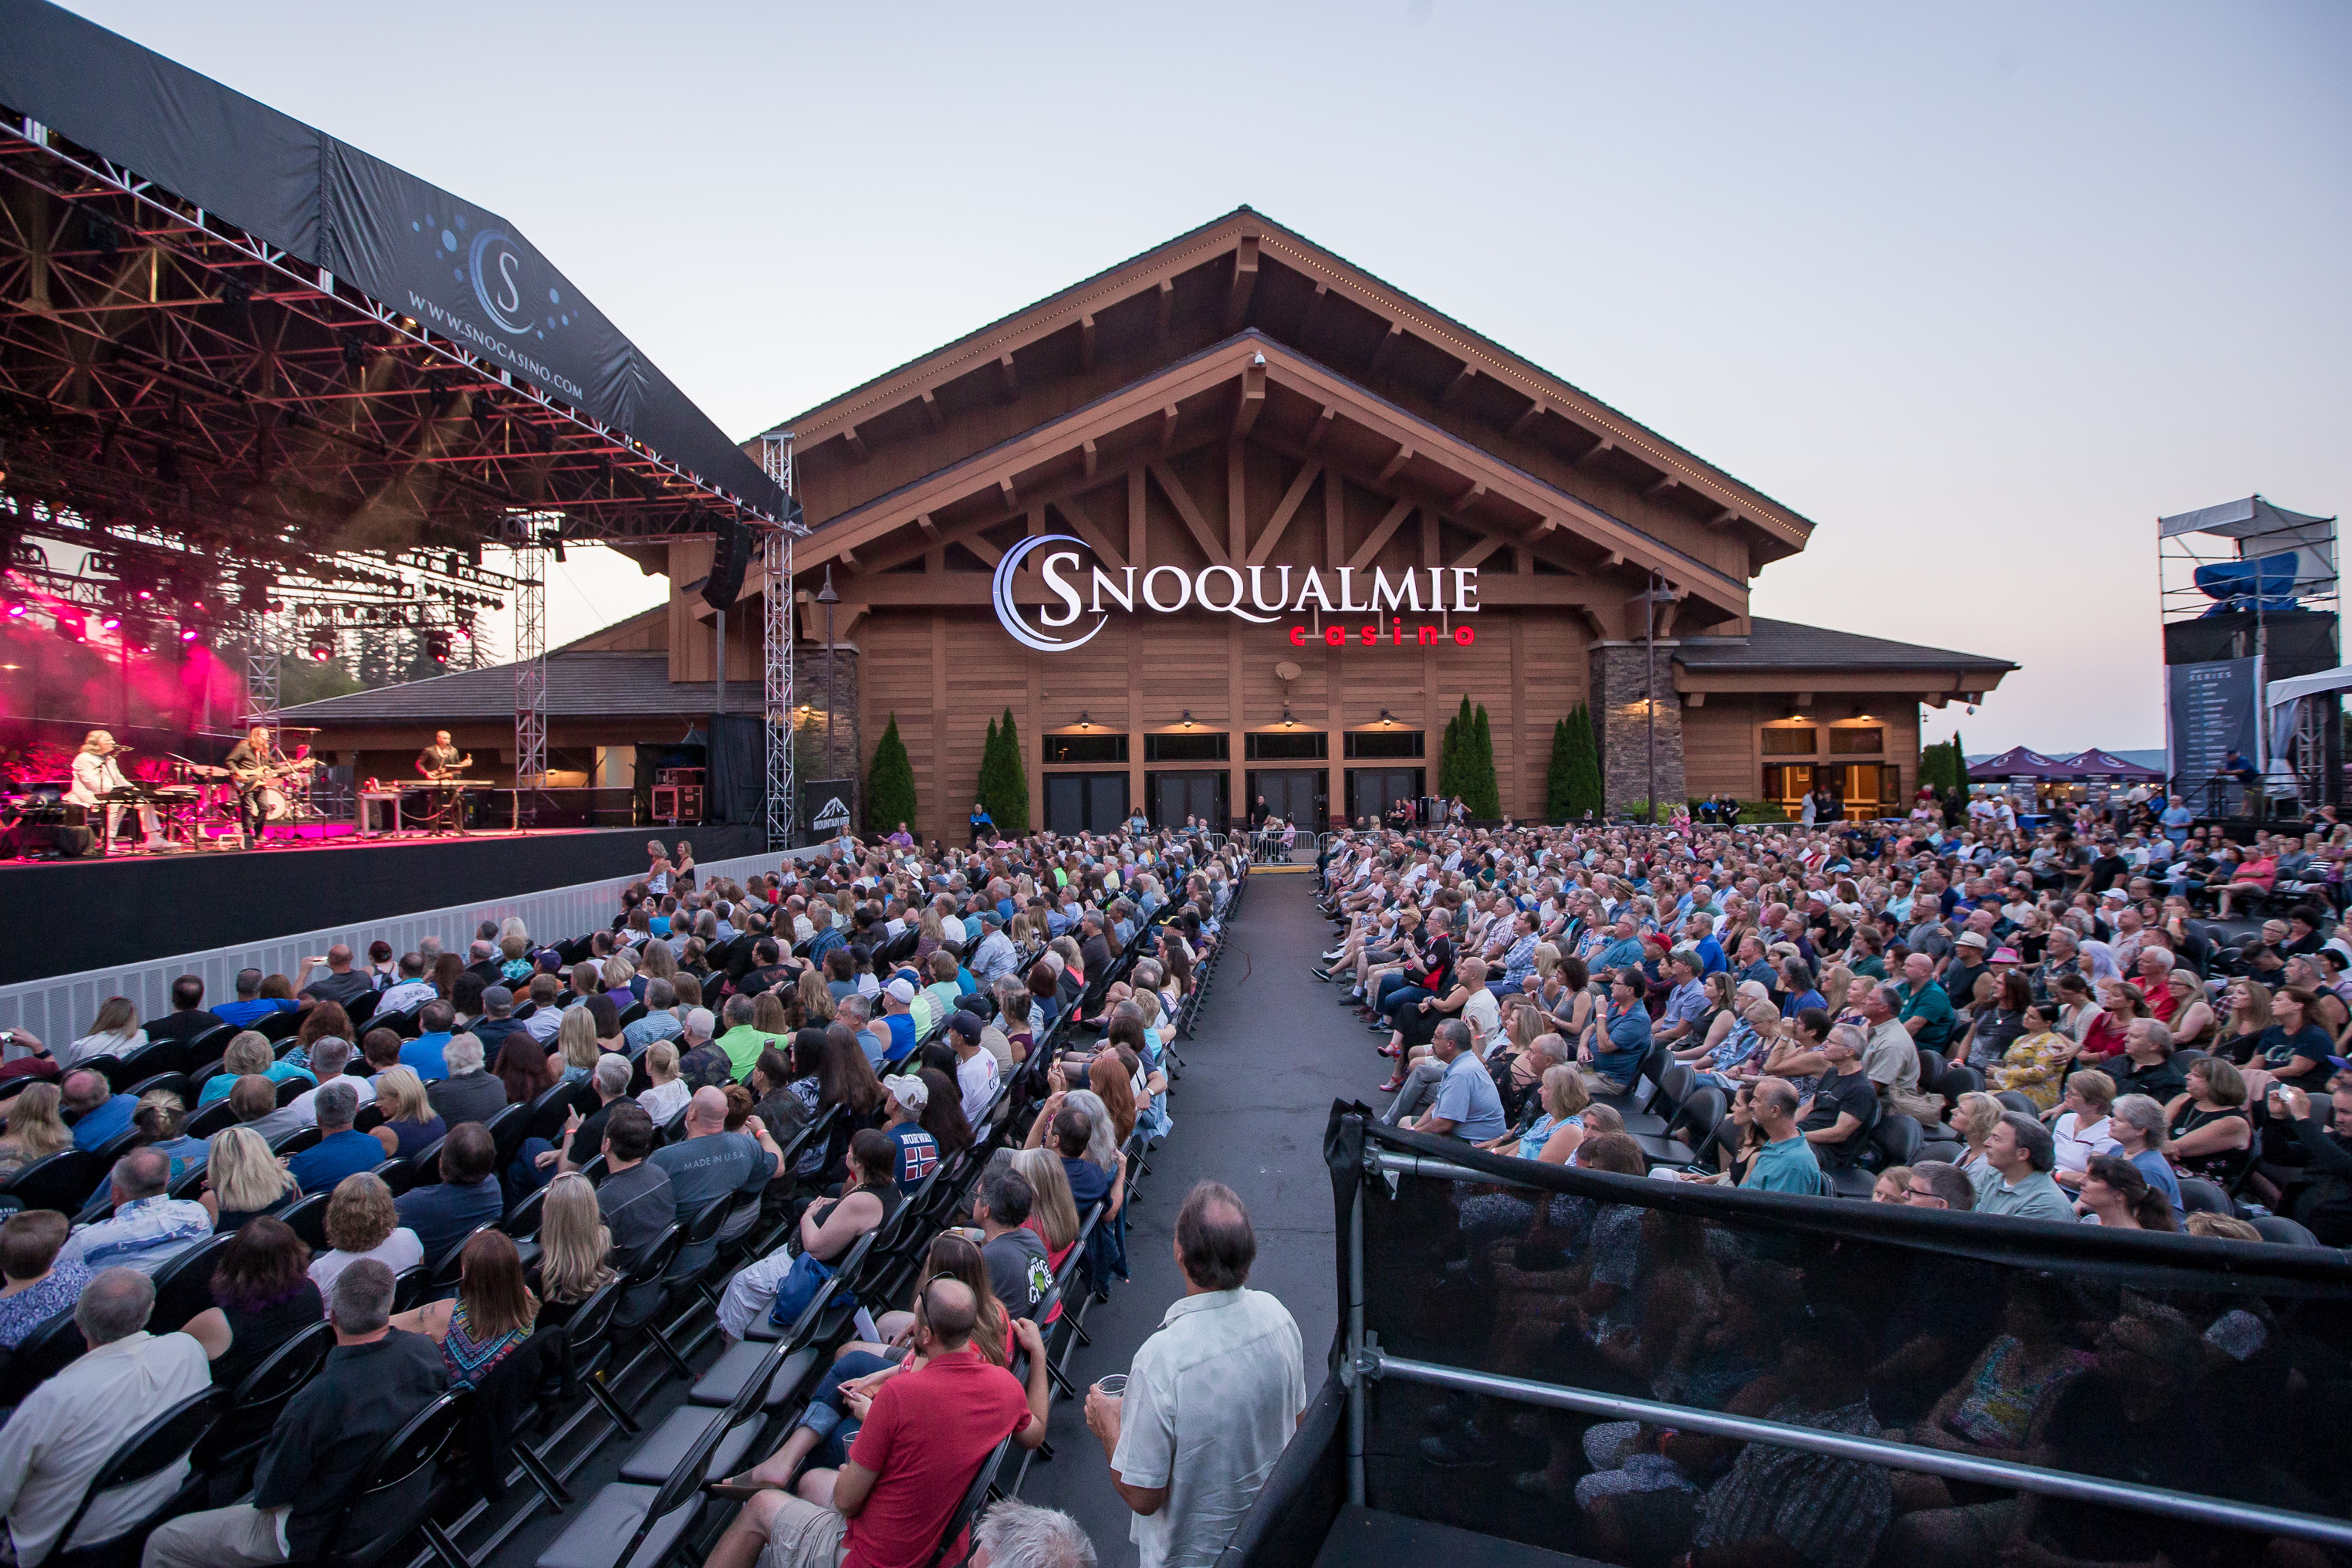 snoqualmie casino vip tickets to summer concerts